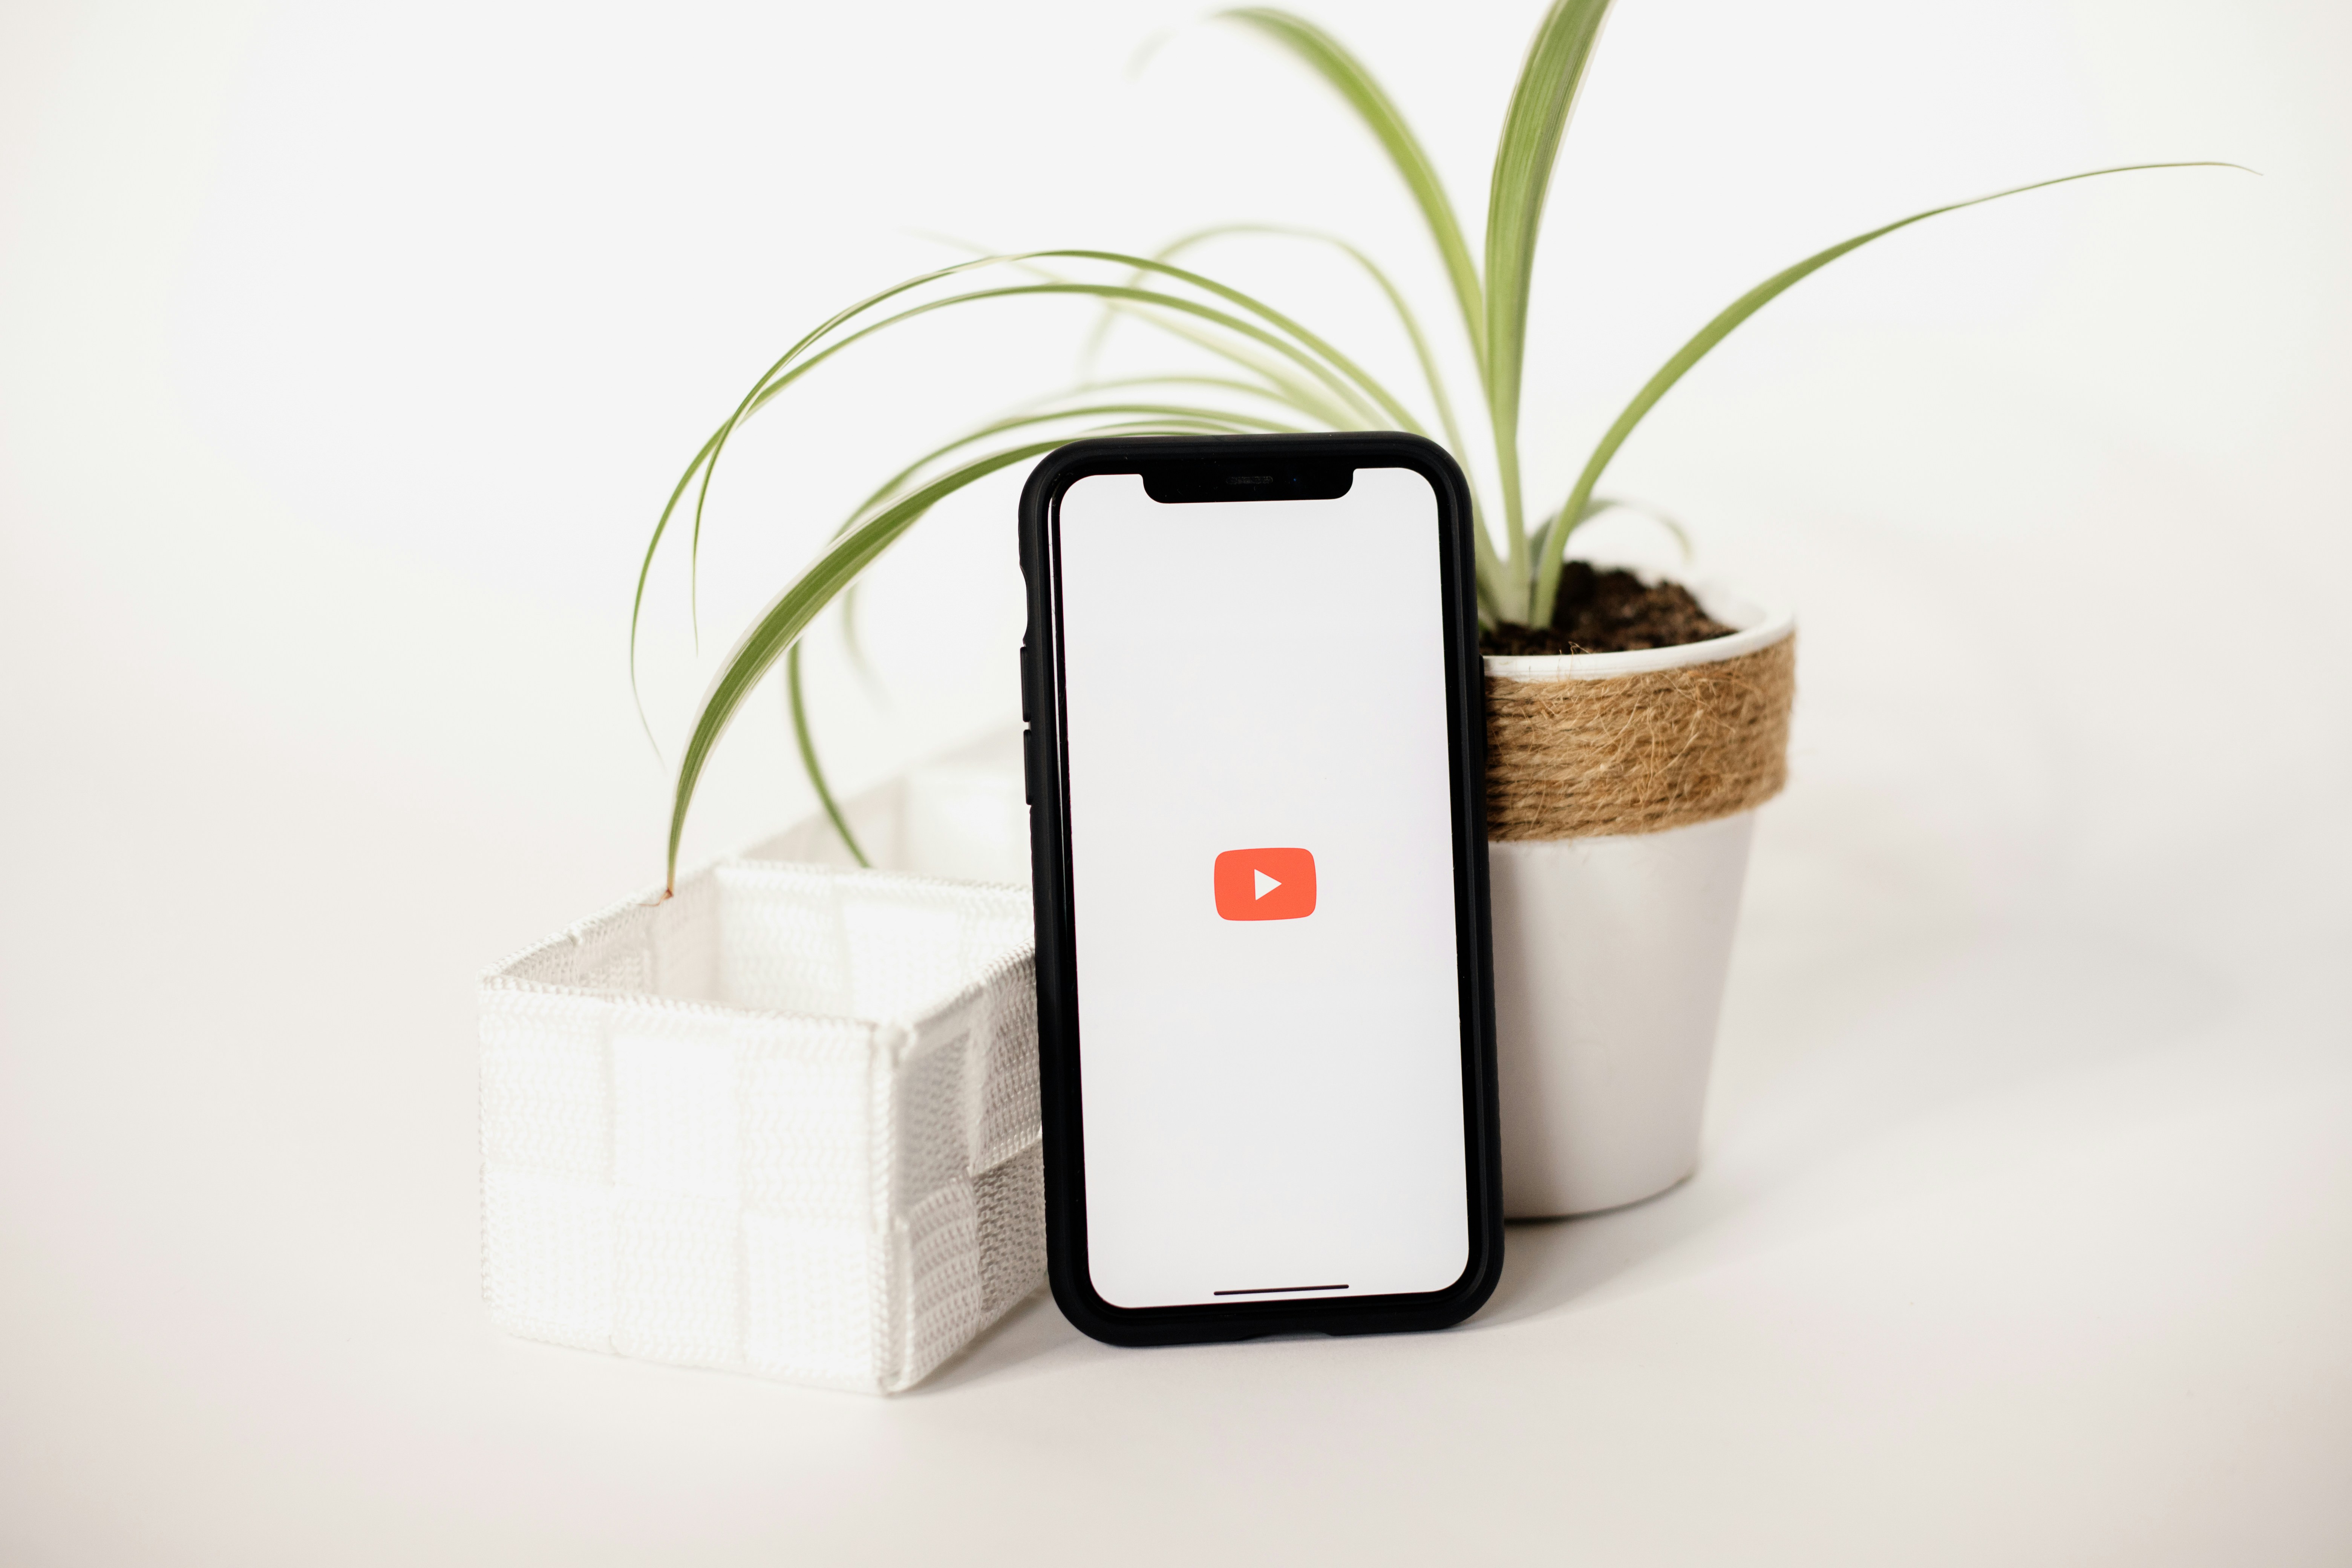 Choose from a curated selection of YouTube photos. Always free on Unsplash.